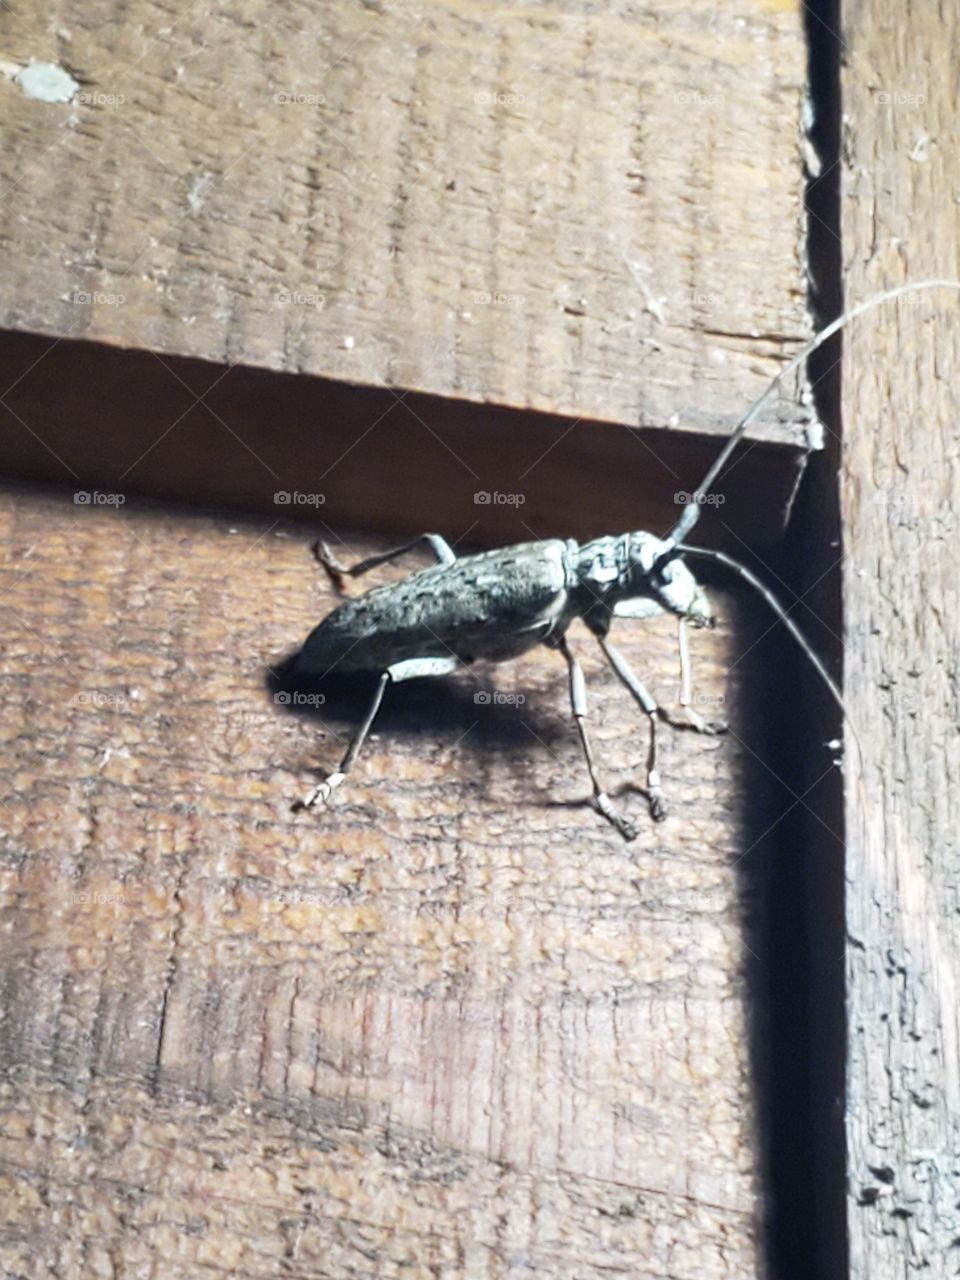 Very inquisitive beetle at our cabin.